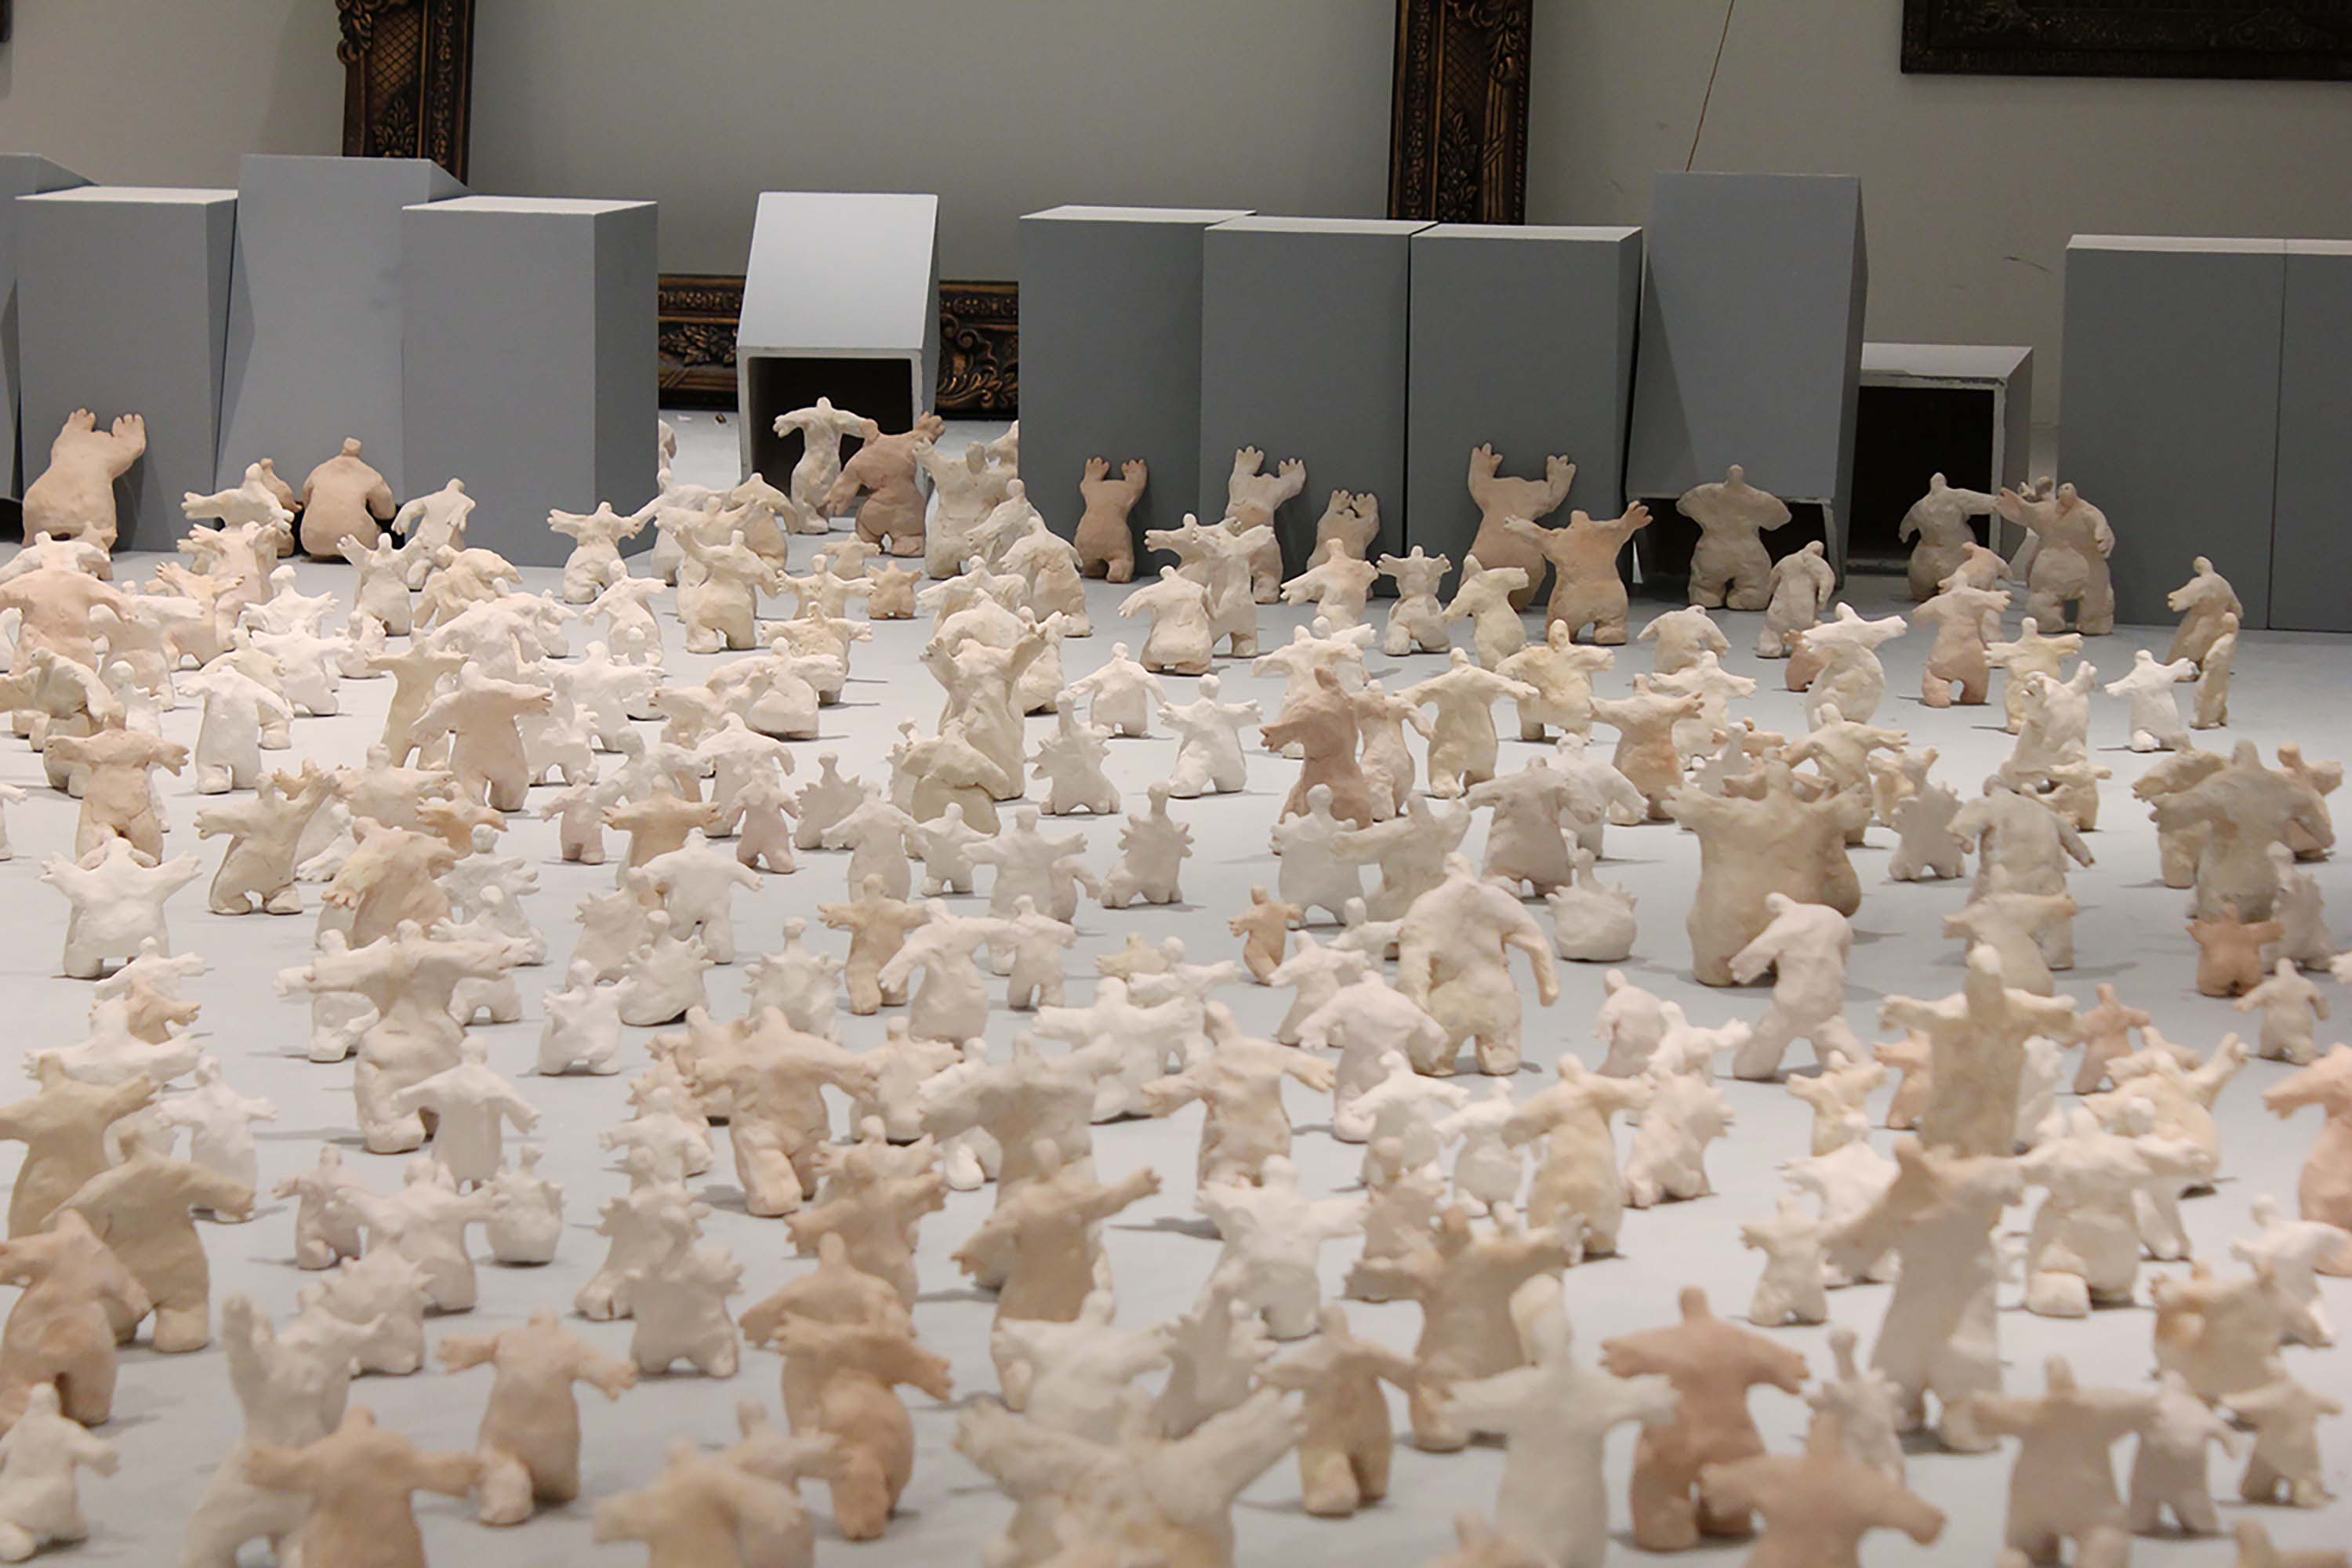 A gallery space with figurines knocking over grey columns.